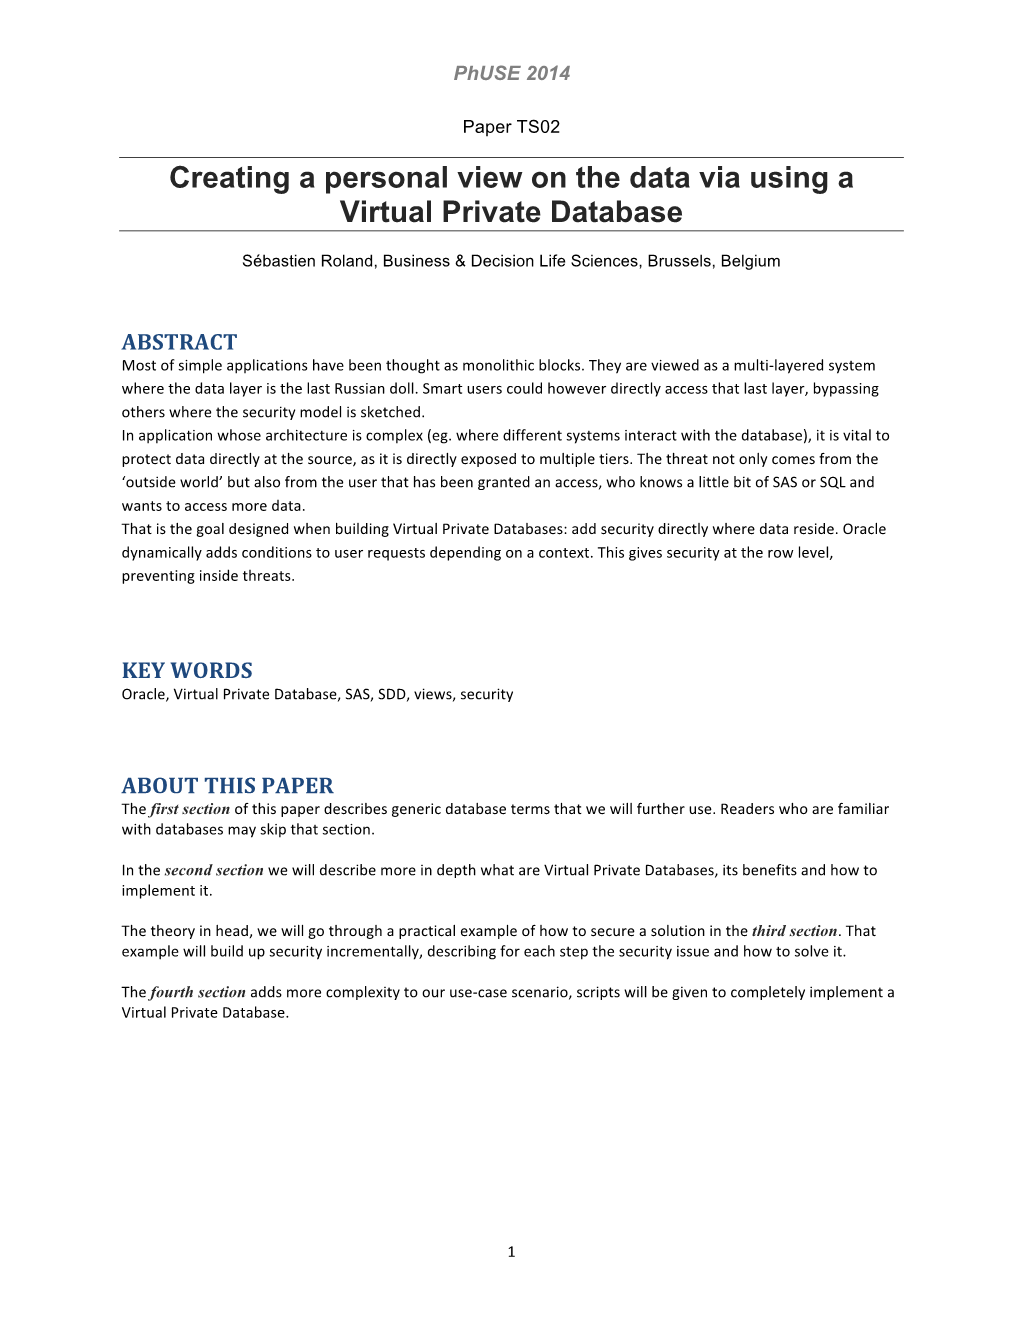 Creating a Personal View on the Data Via Using a Virtual Private Database